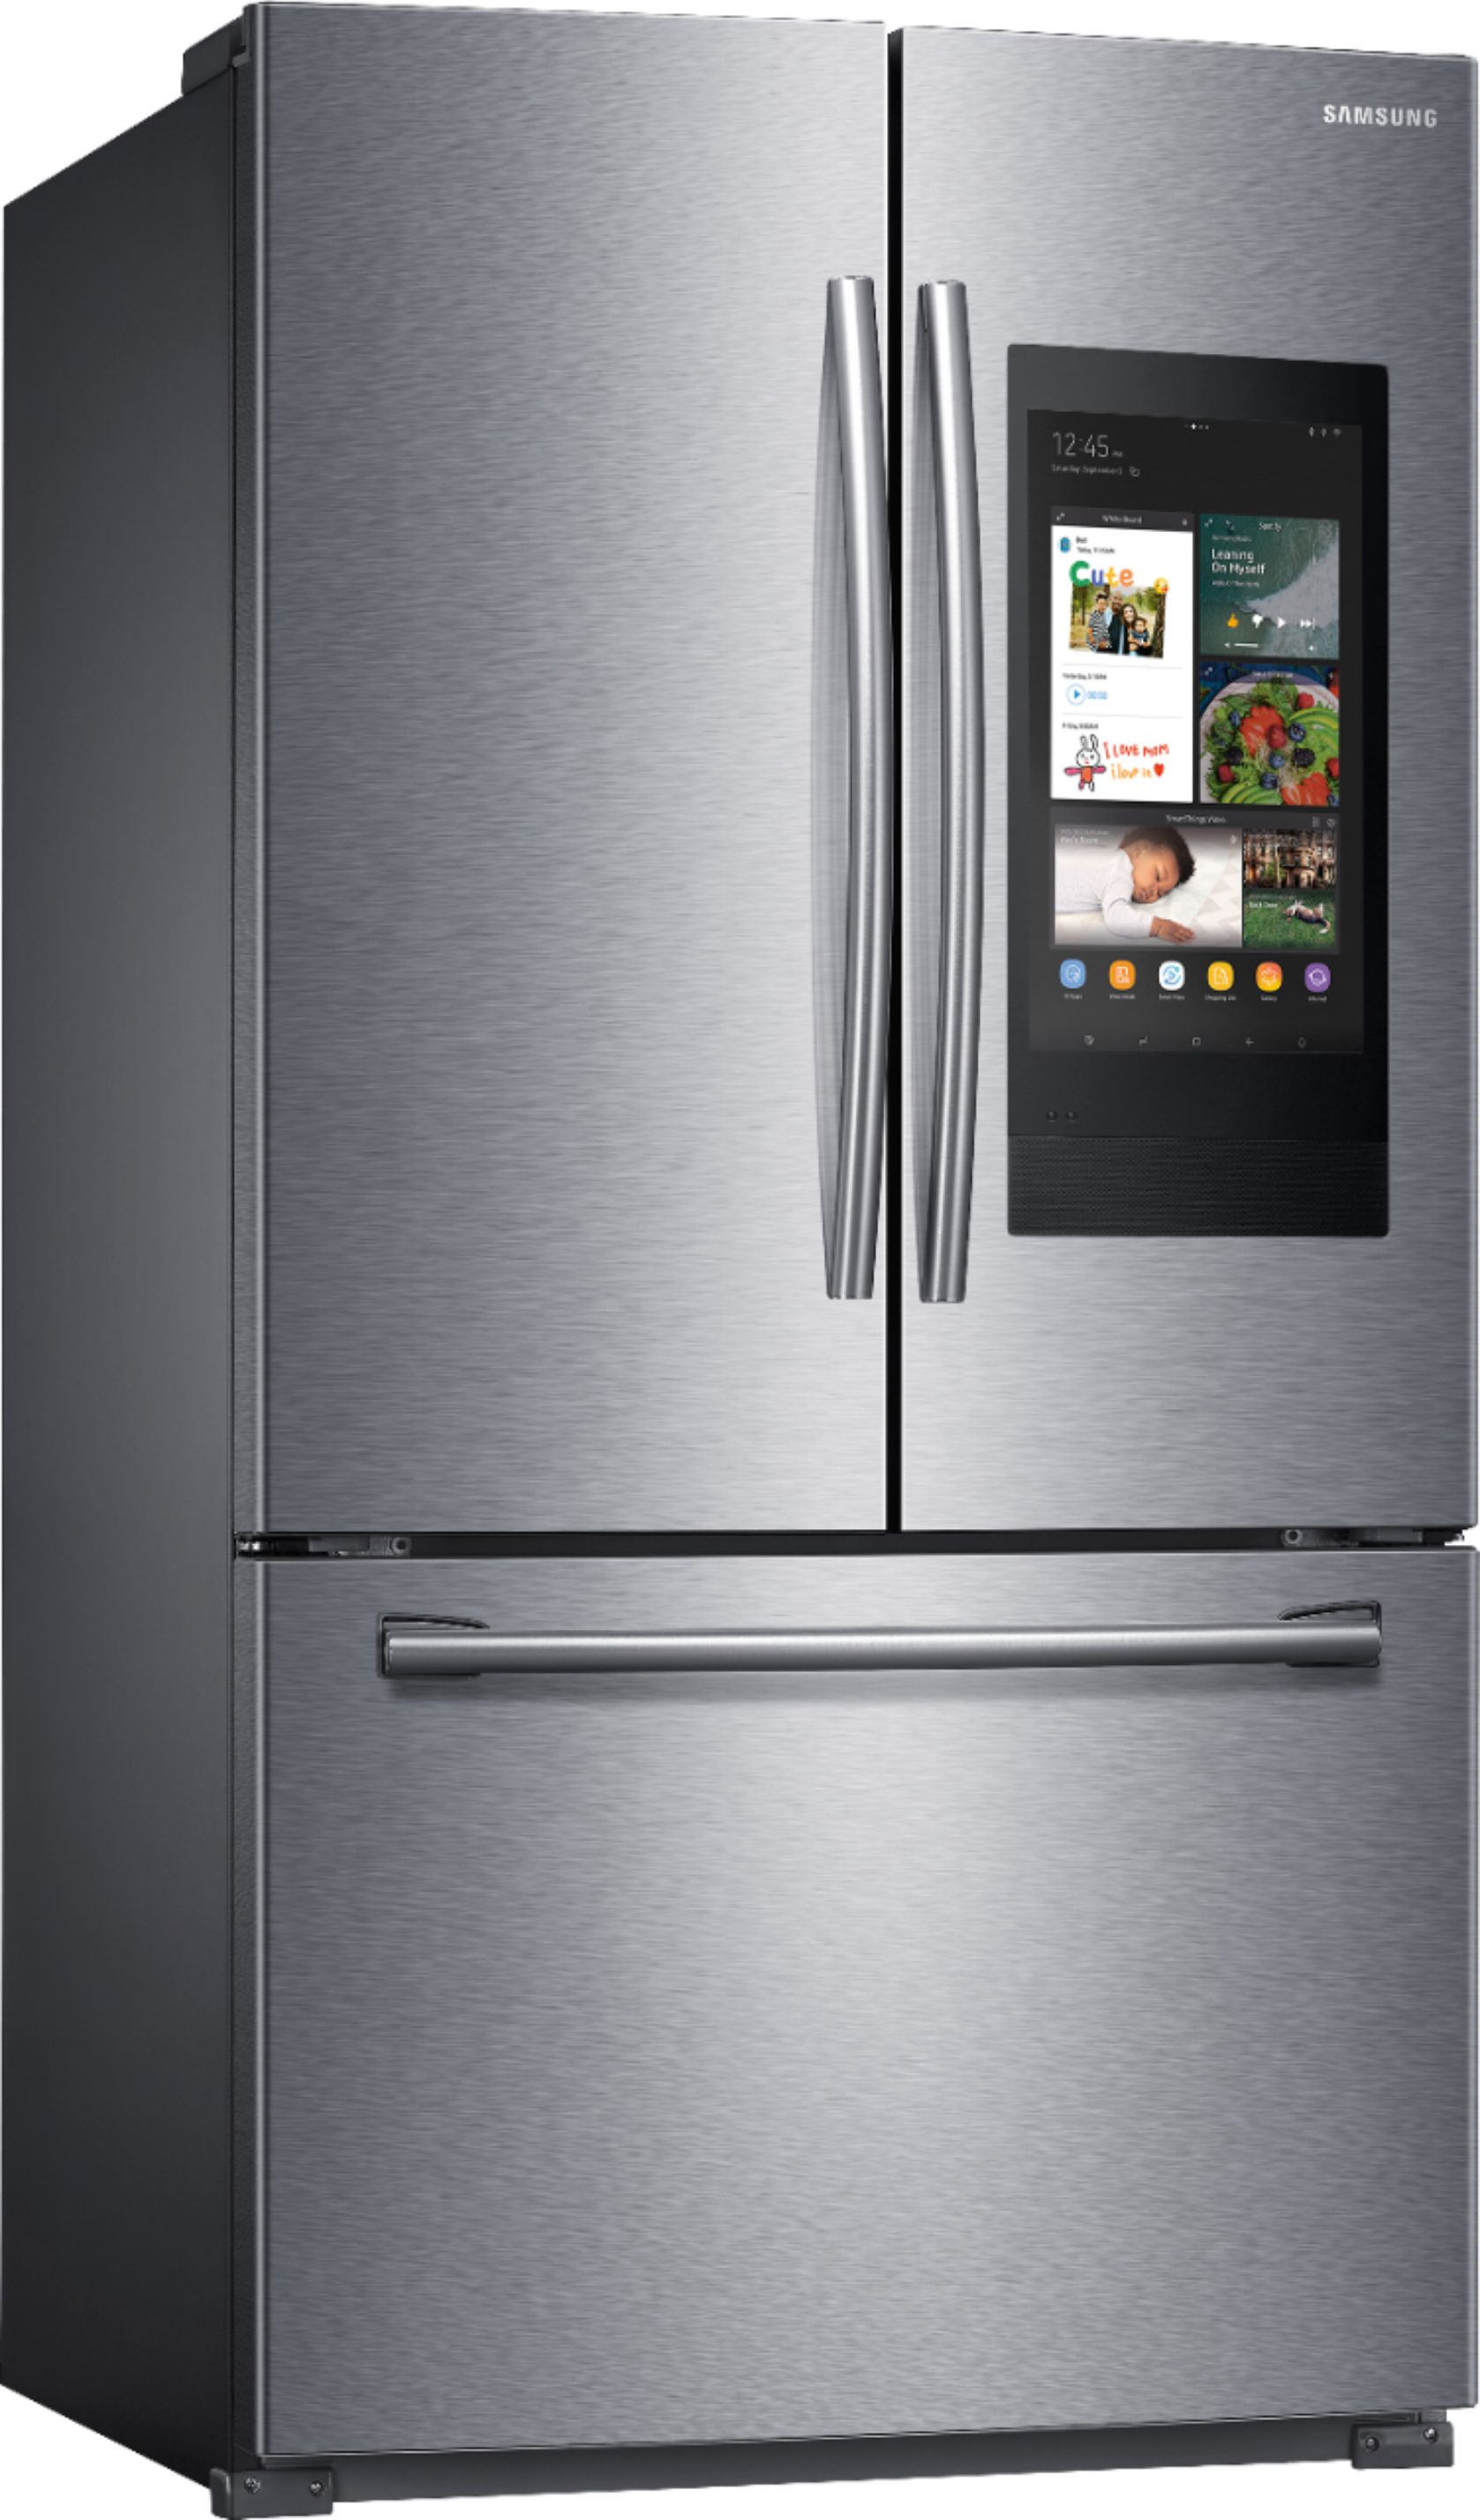 Angle View: Samsung - 25.1 Cu. Ft. French Door Refrigerator with Family Hub - Stainless steel